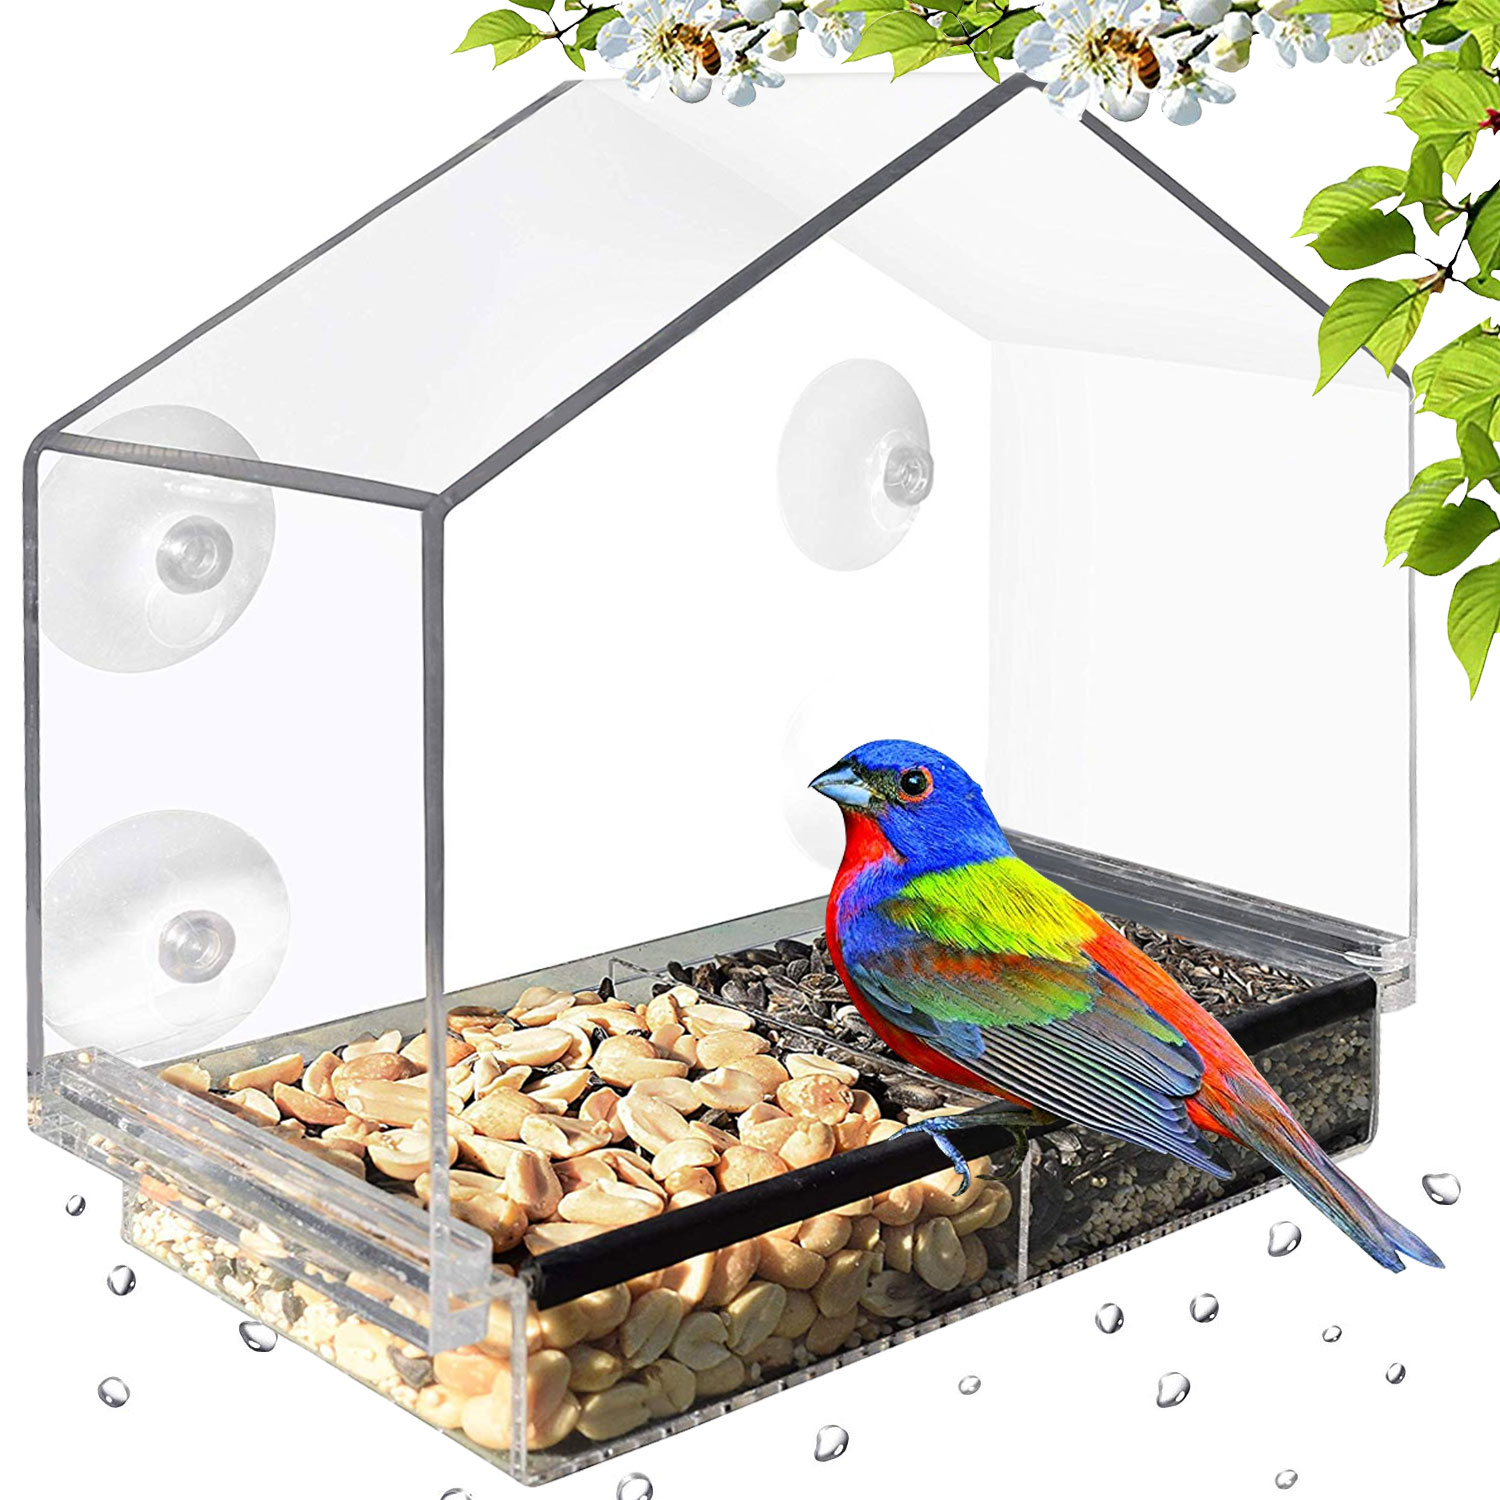 Drain Holes and 3 Suction Cups Window Bird Feeder with Removable Tray Large Clear Bird House 